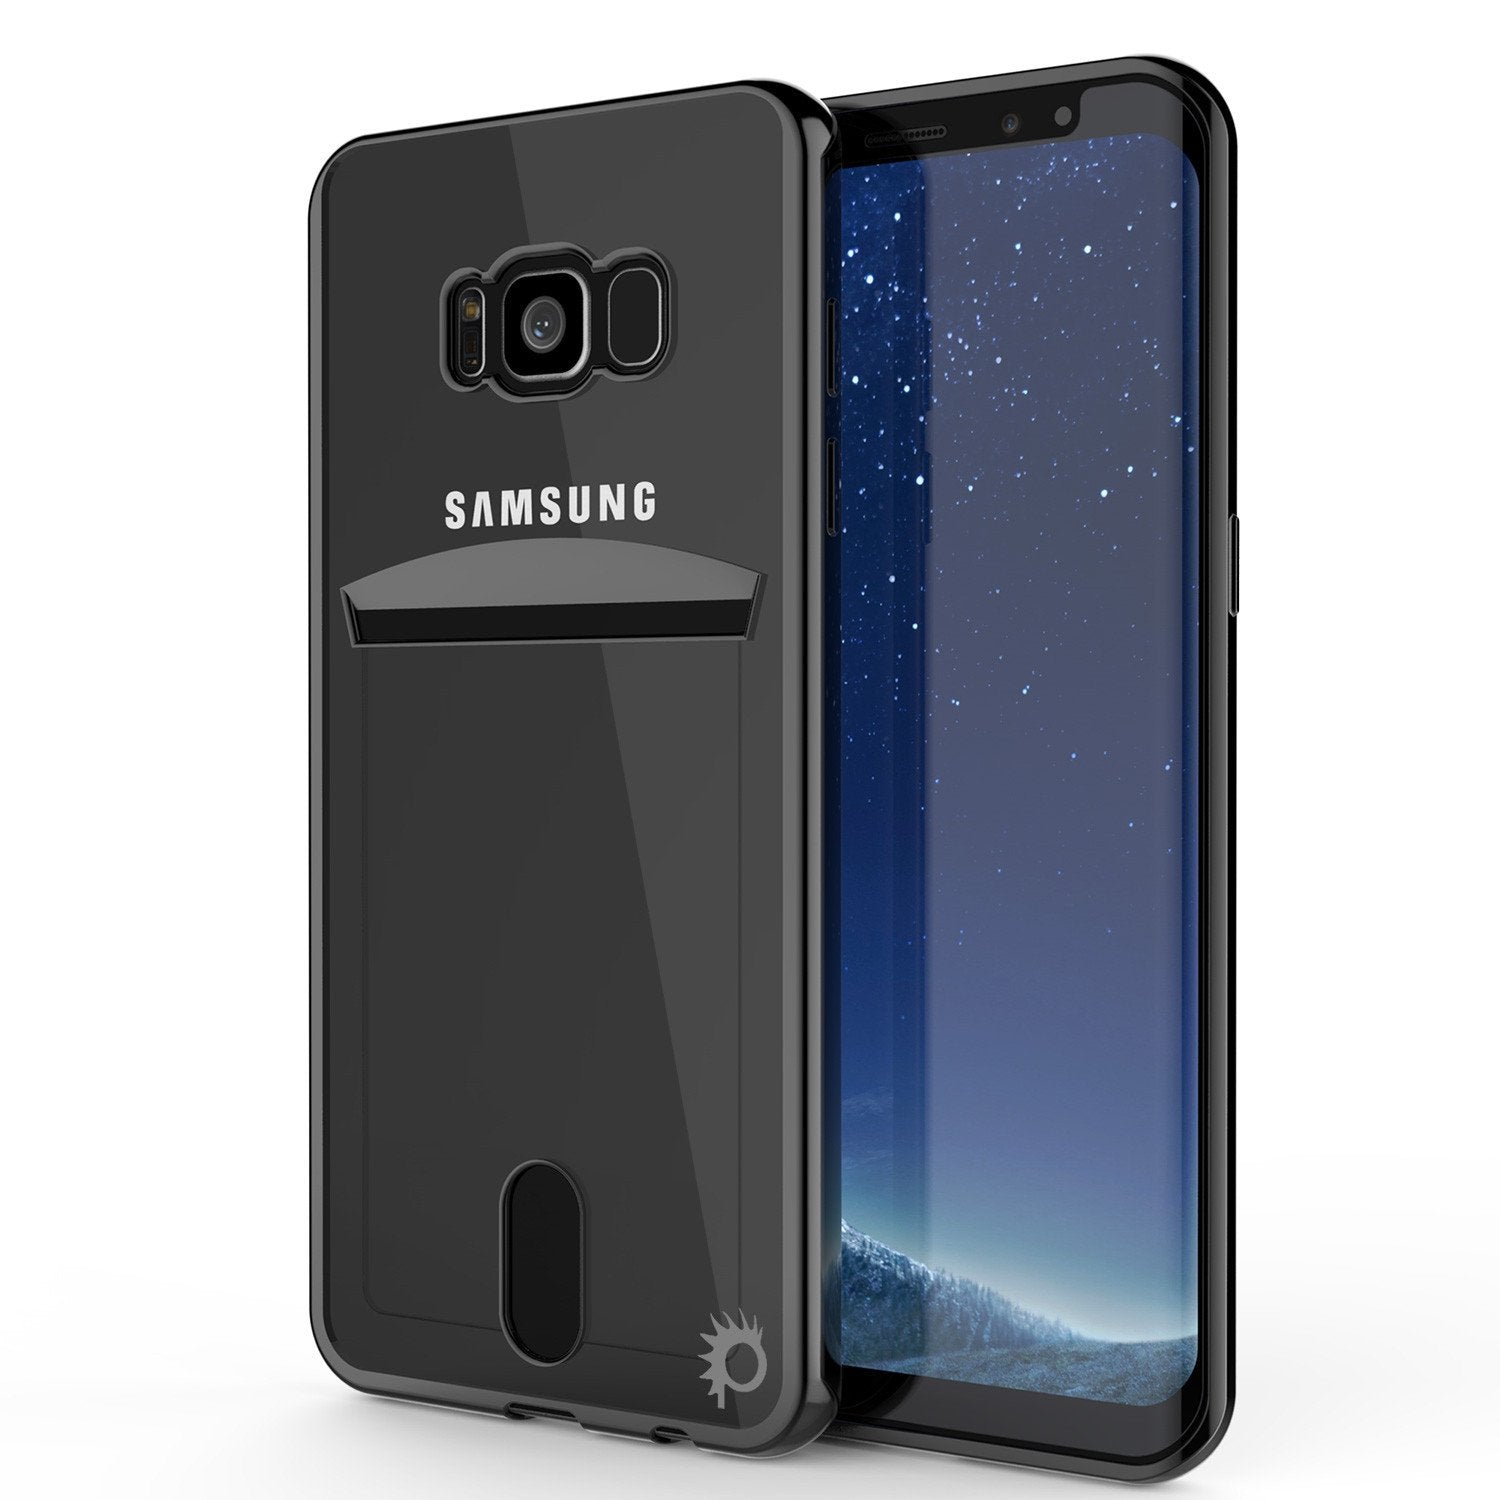 Galaxy S8 Case PUNKCASE LUCID black Series Armor Case Cover Ultra Fit